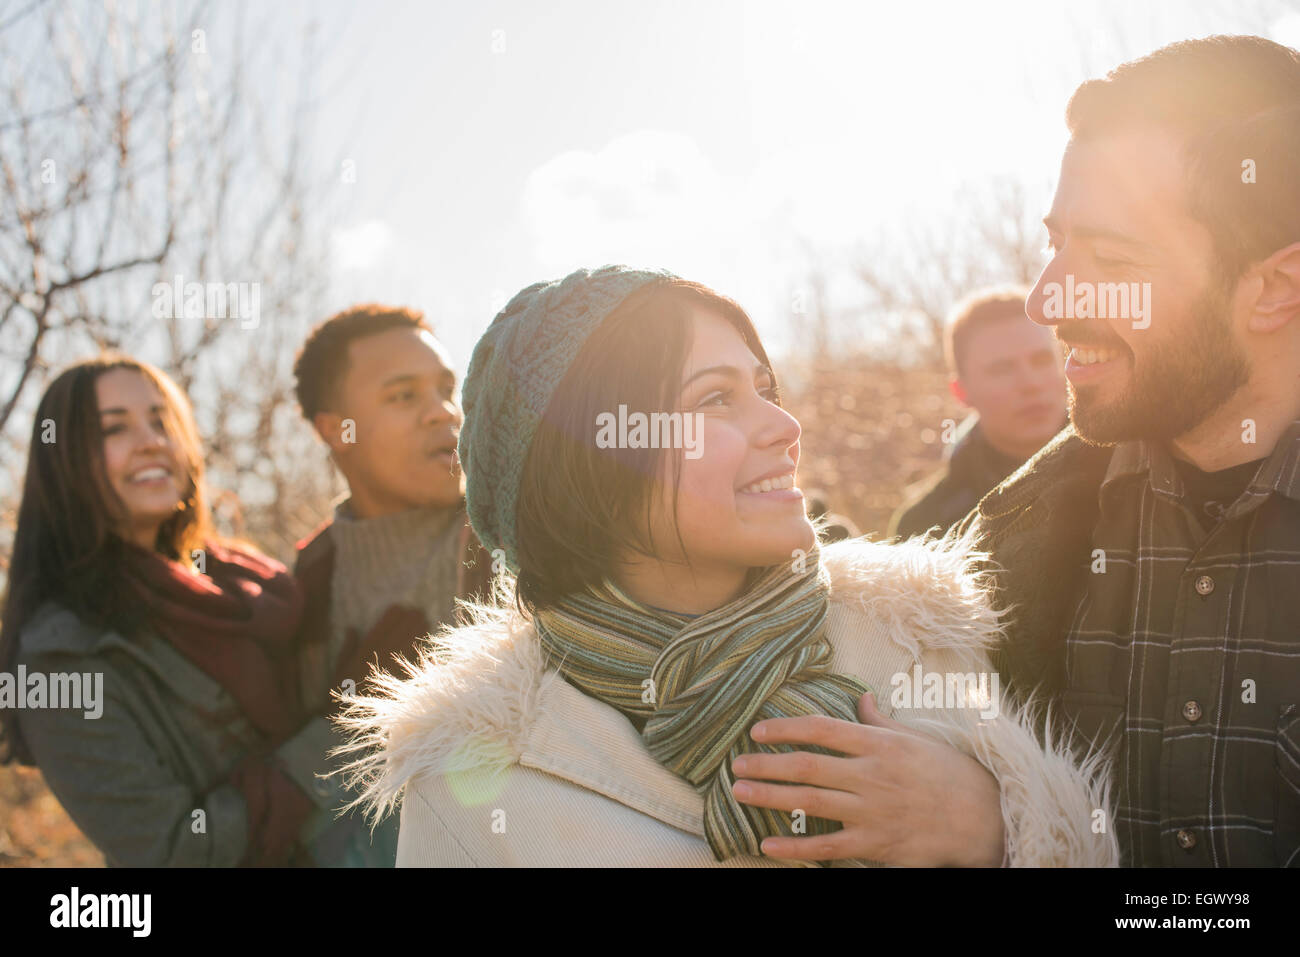 A group of friends on a winter walk. Stock Photo